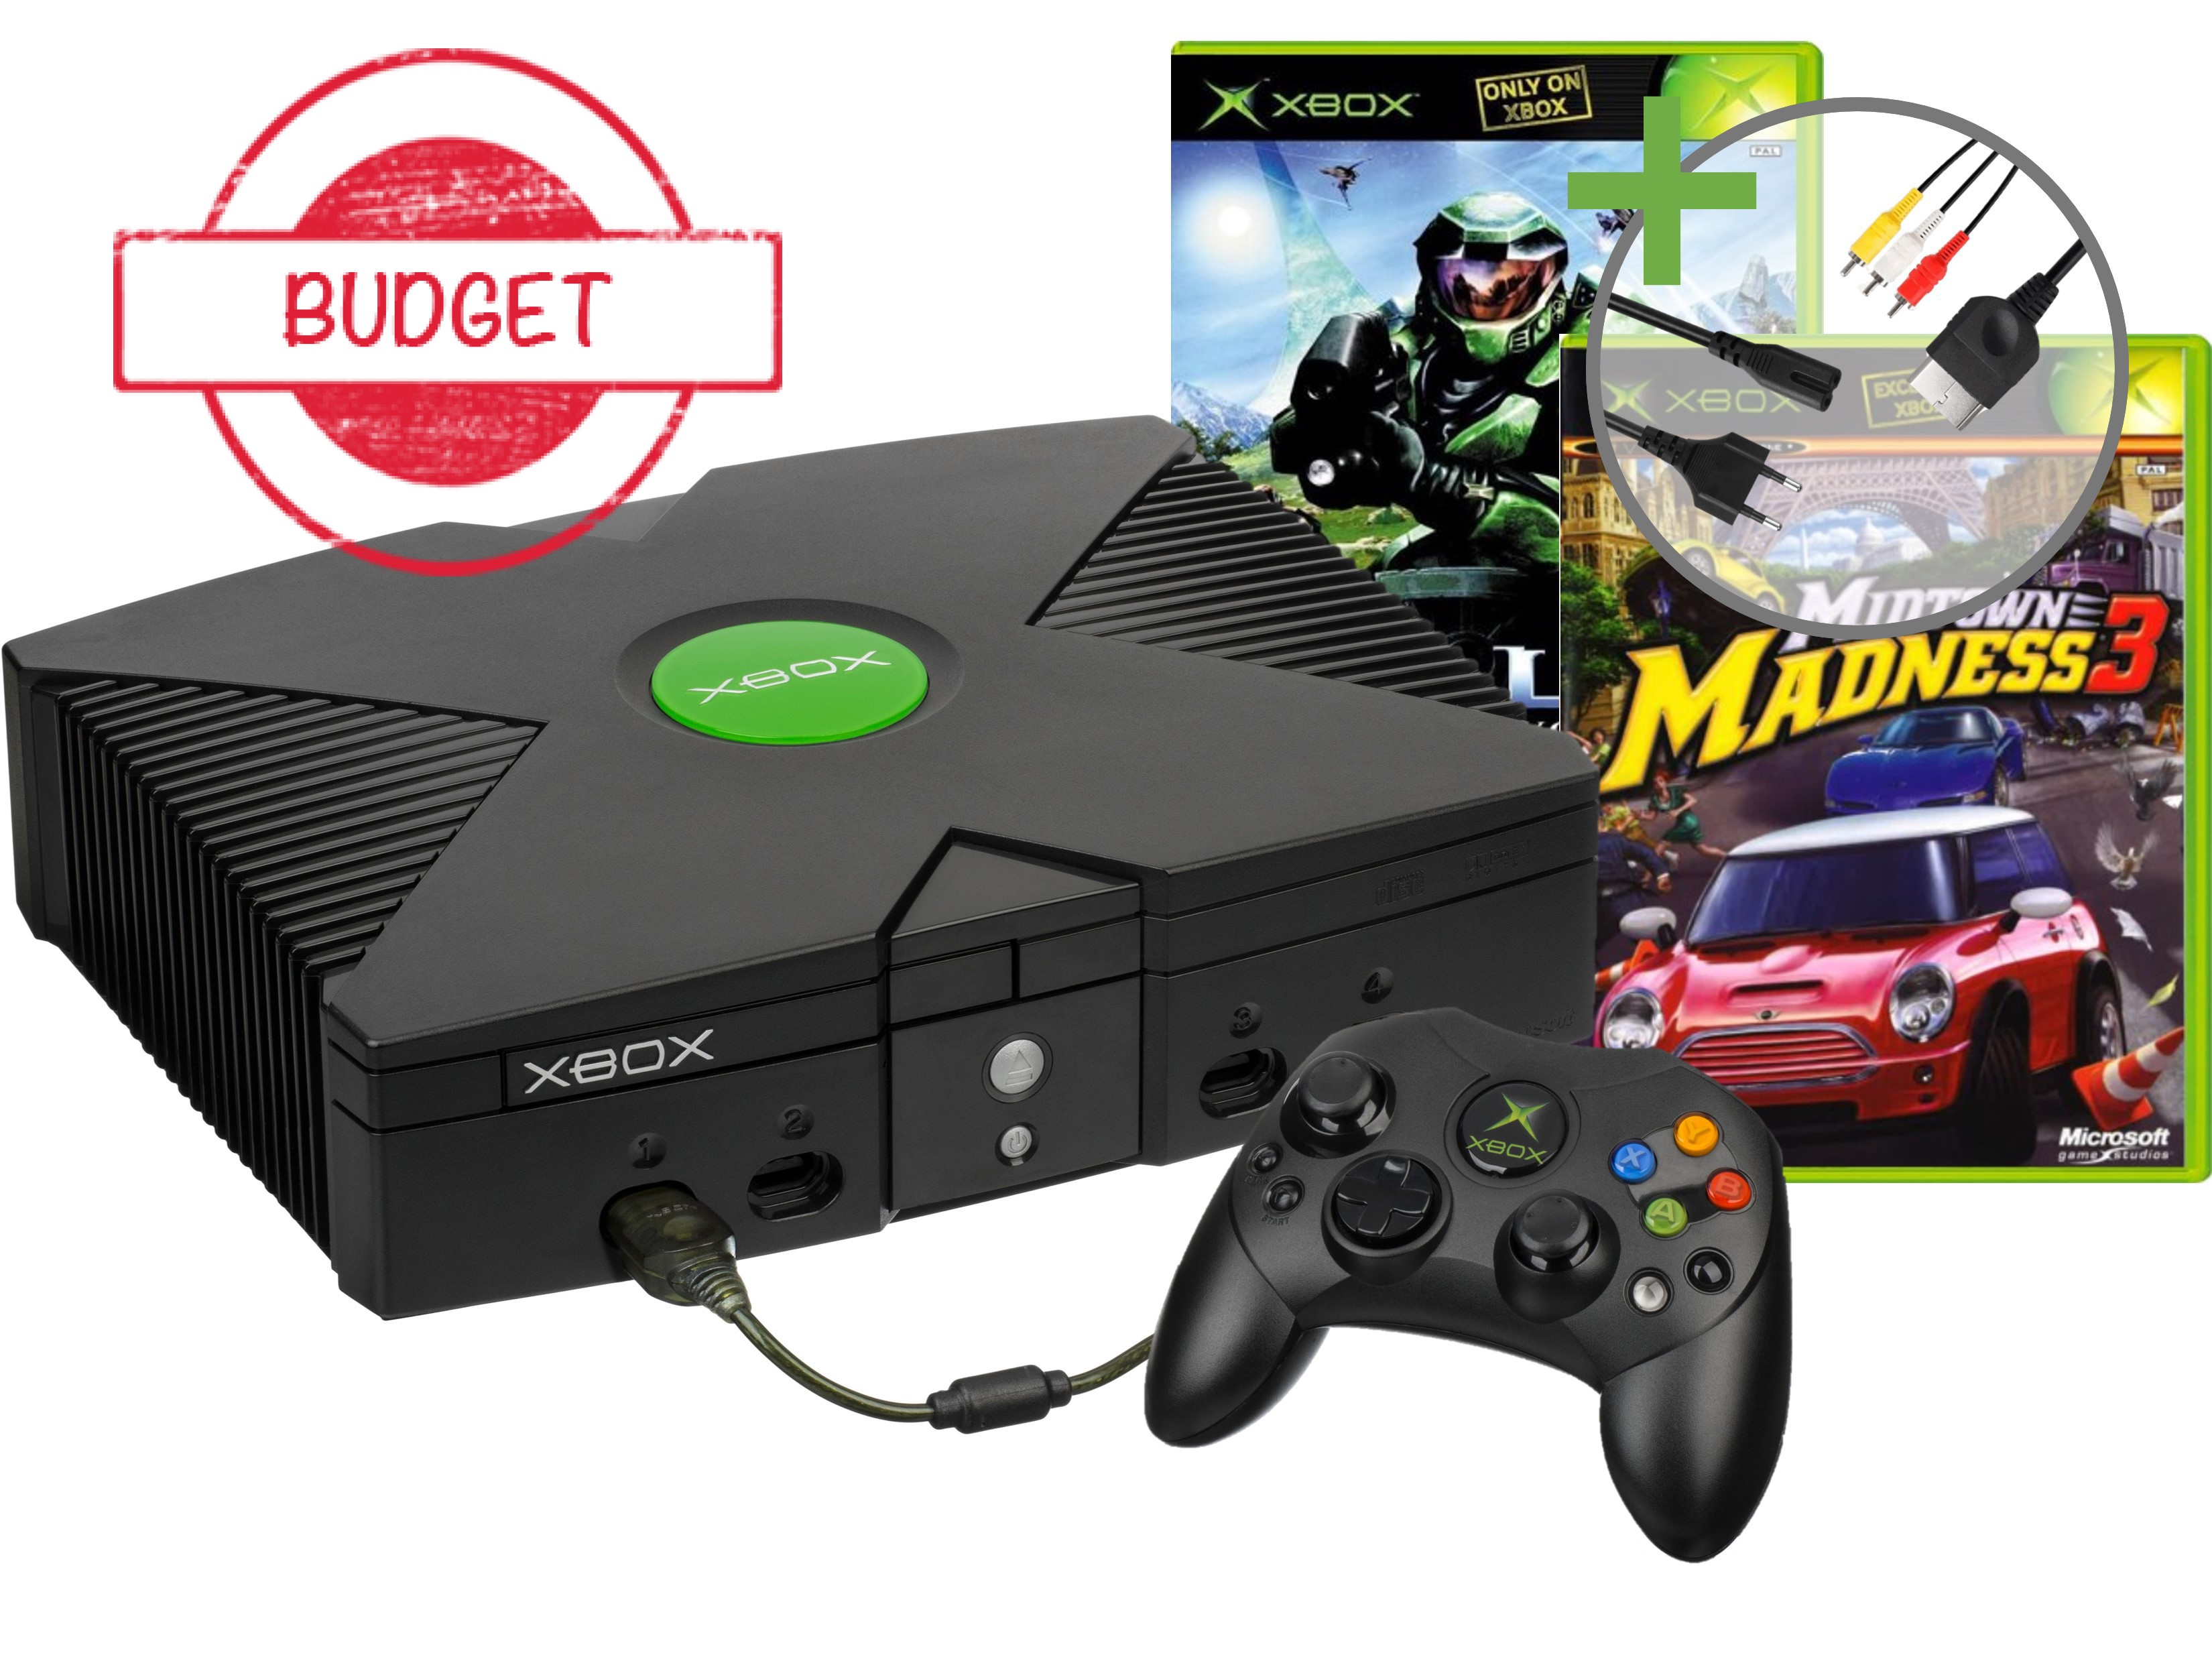 Microsoft Xbox Classic Starter Pack - Halo and Midtown Madness 3 Edition - Budget Kopen | Xbox Original Hardware